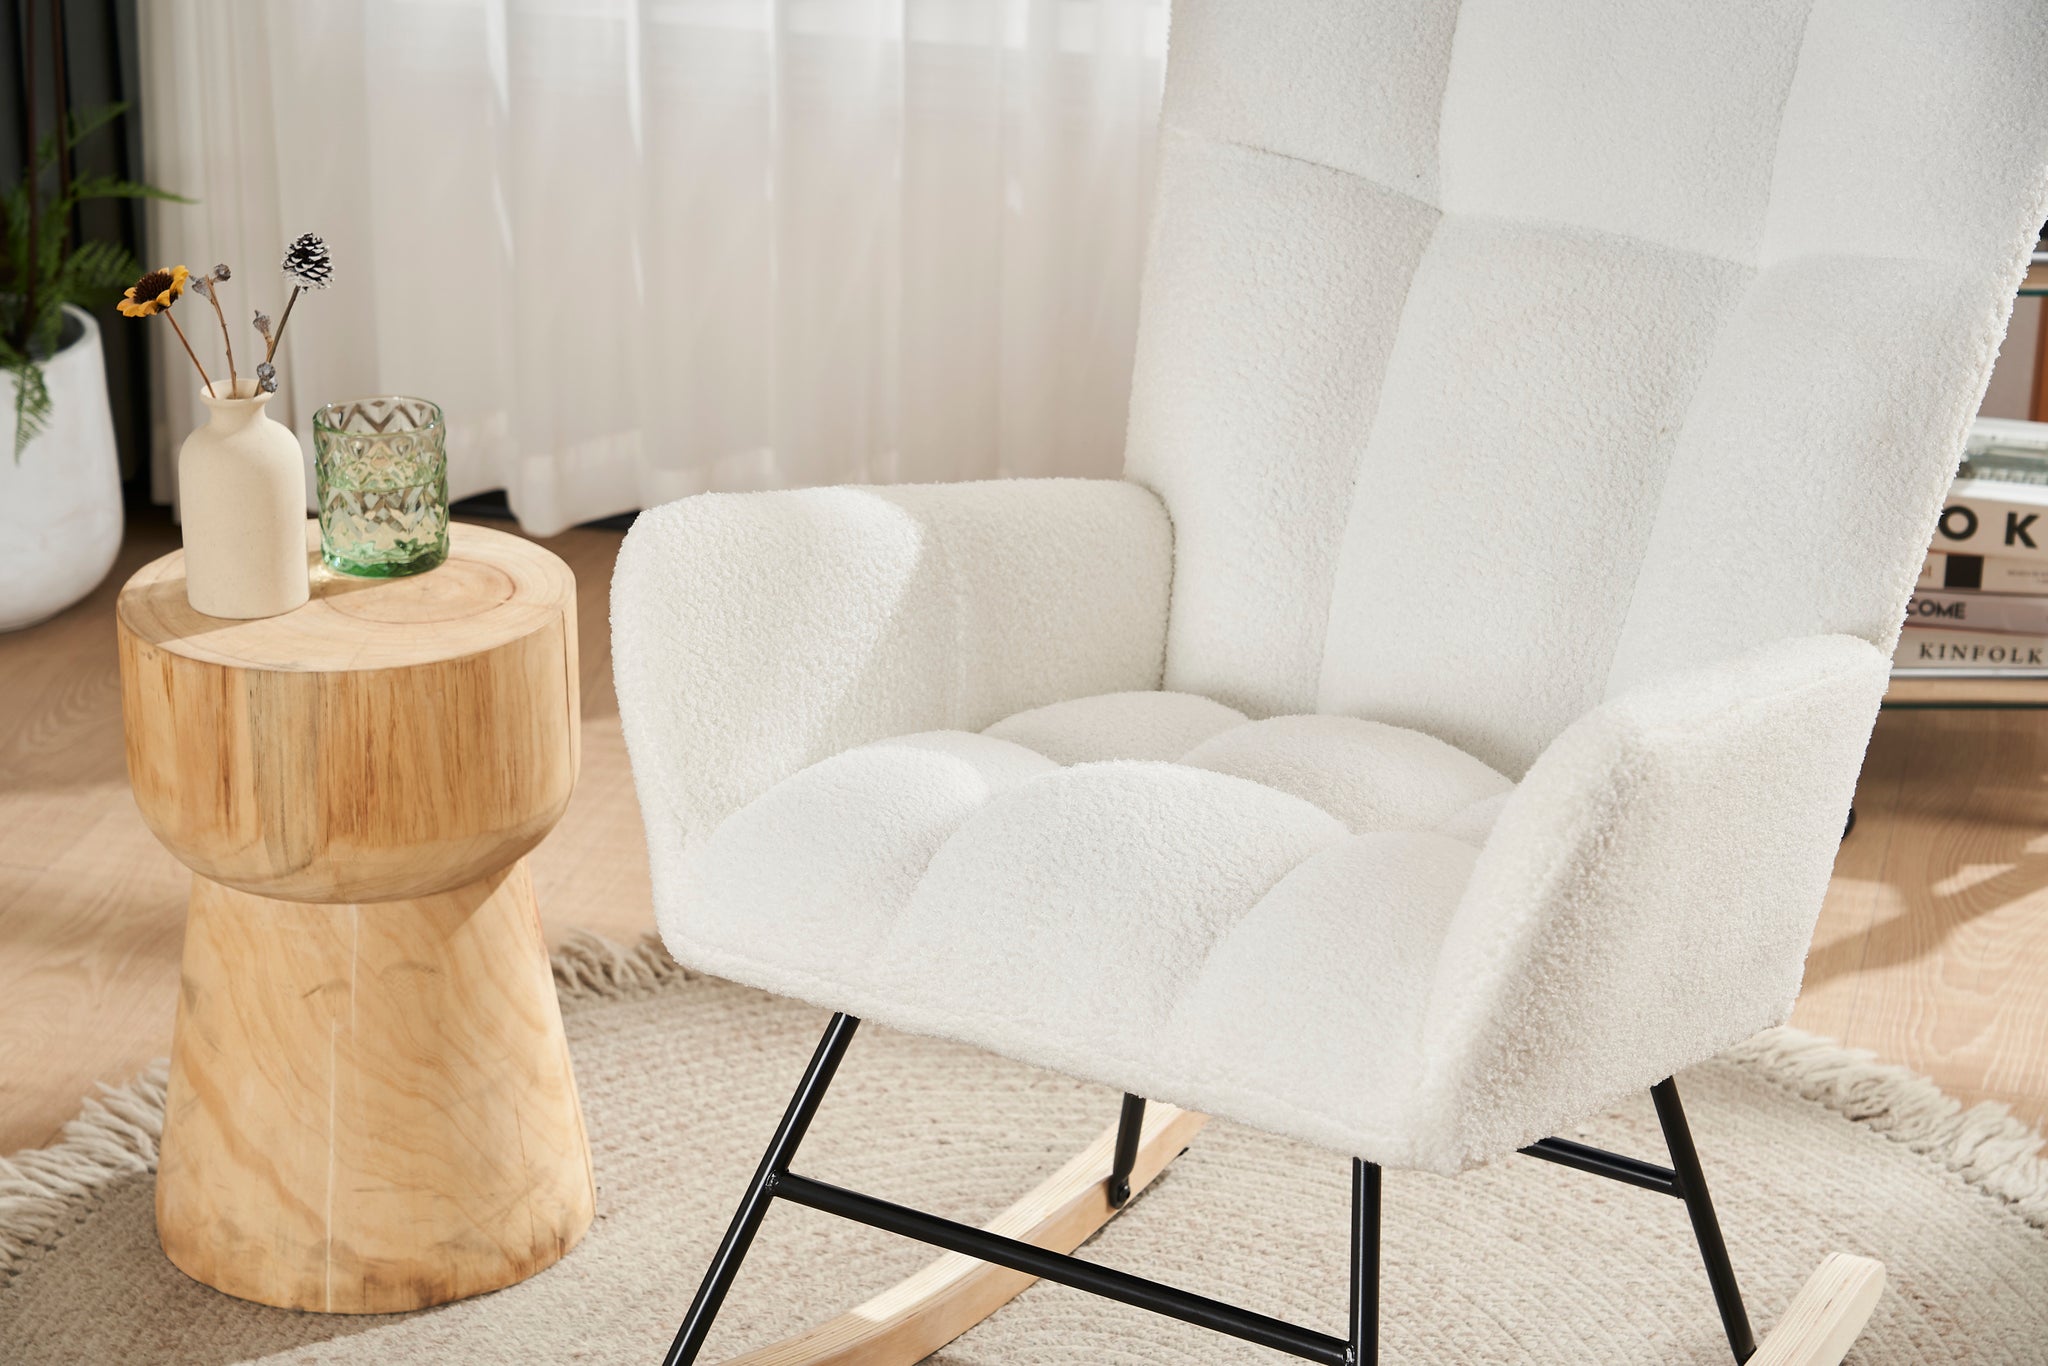 Rocking Chair Nursery, Solid Wood Legs Reading Chair white-primary living space-modern-rocking